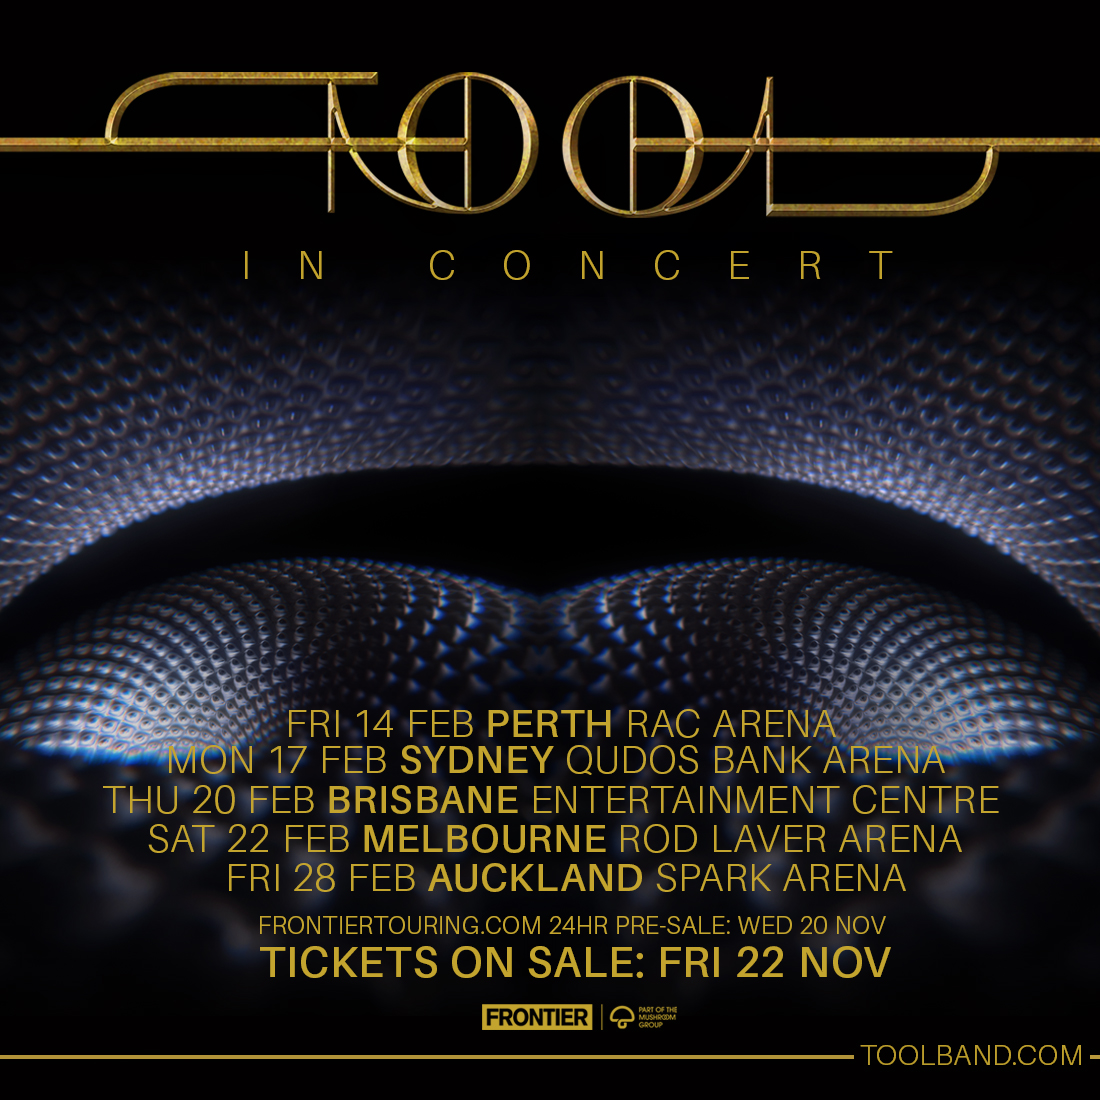 TOOL RETURNING TO AUSTRALIA & NEW ZEALAND FOR THE FIRST TIME IN SIX YEARS – FEBRUARY 2020